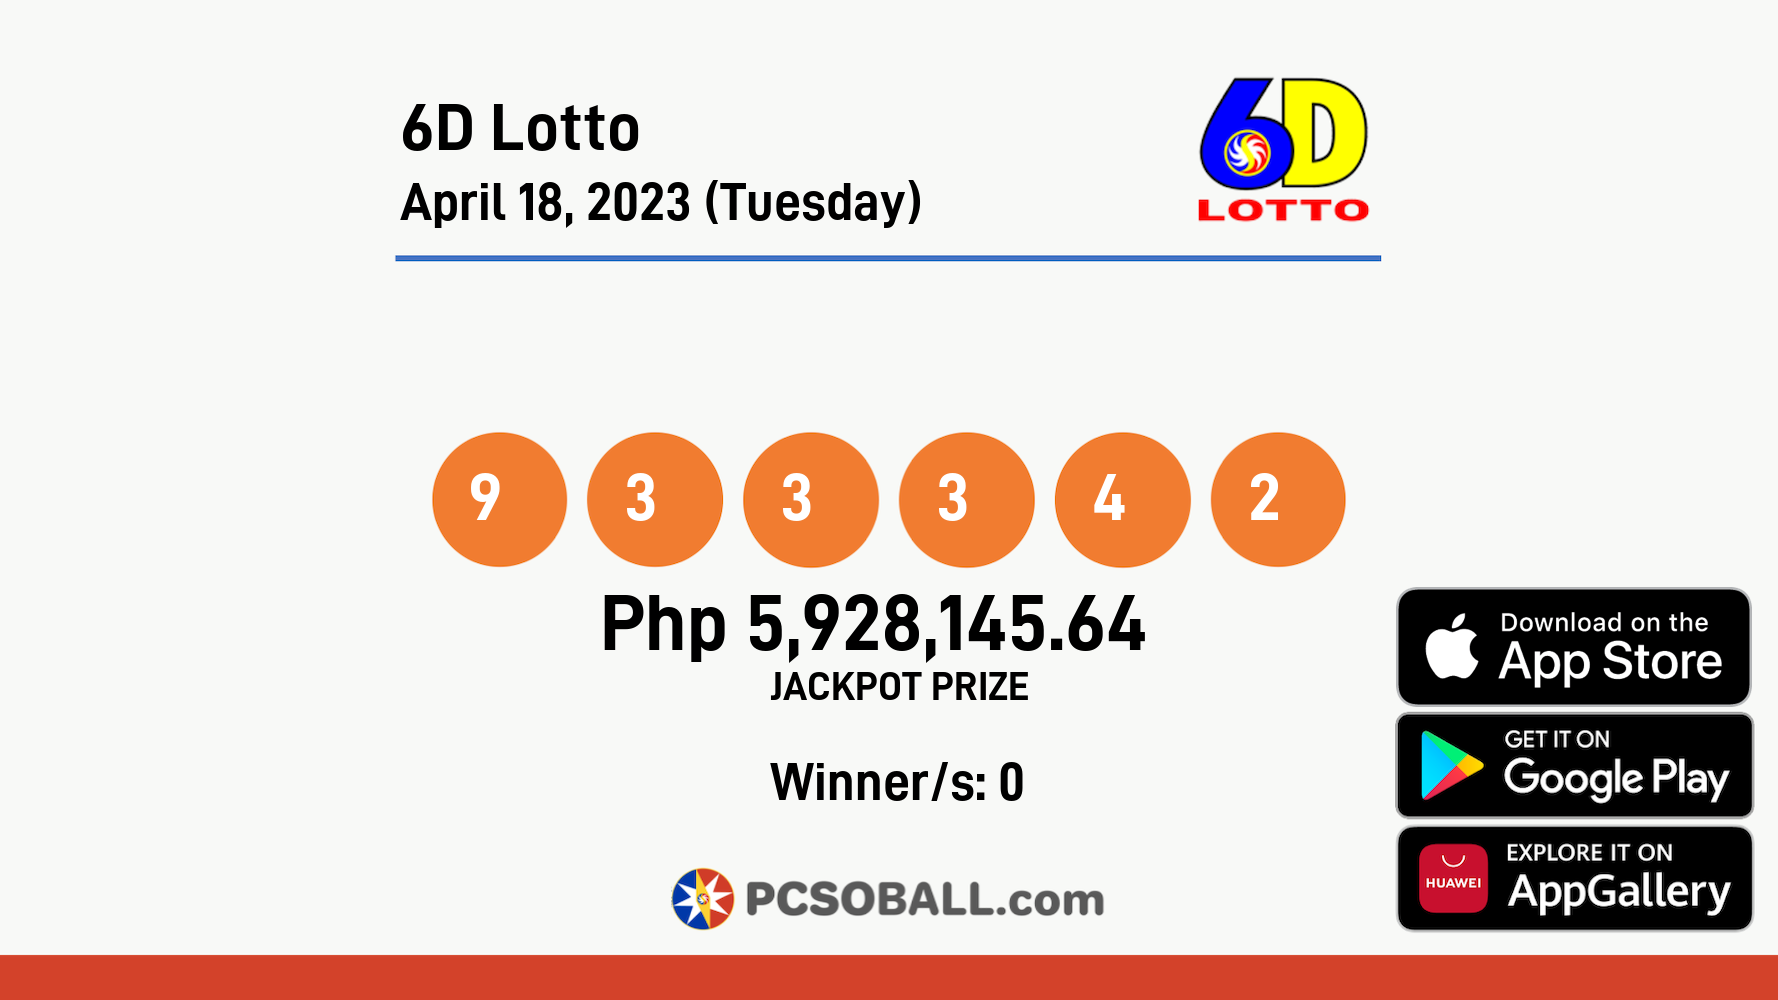 6D Lotto April 18, 2023 (Tuesday) Result